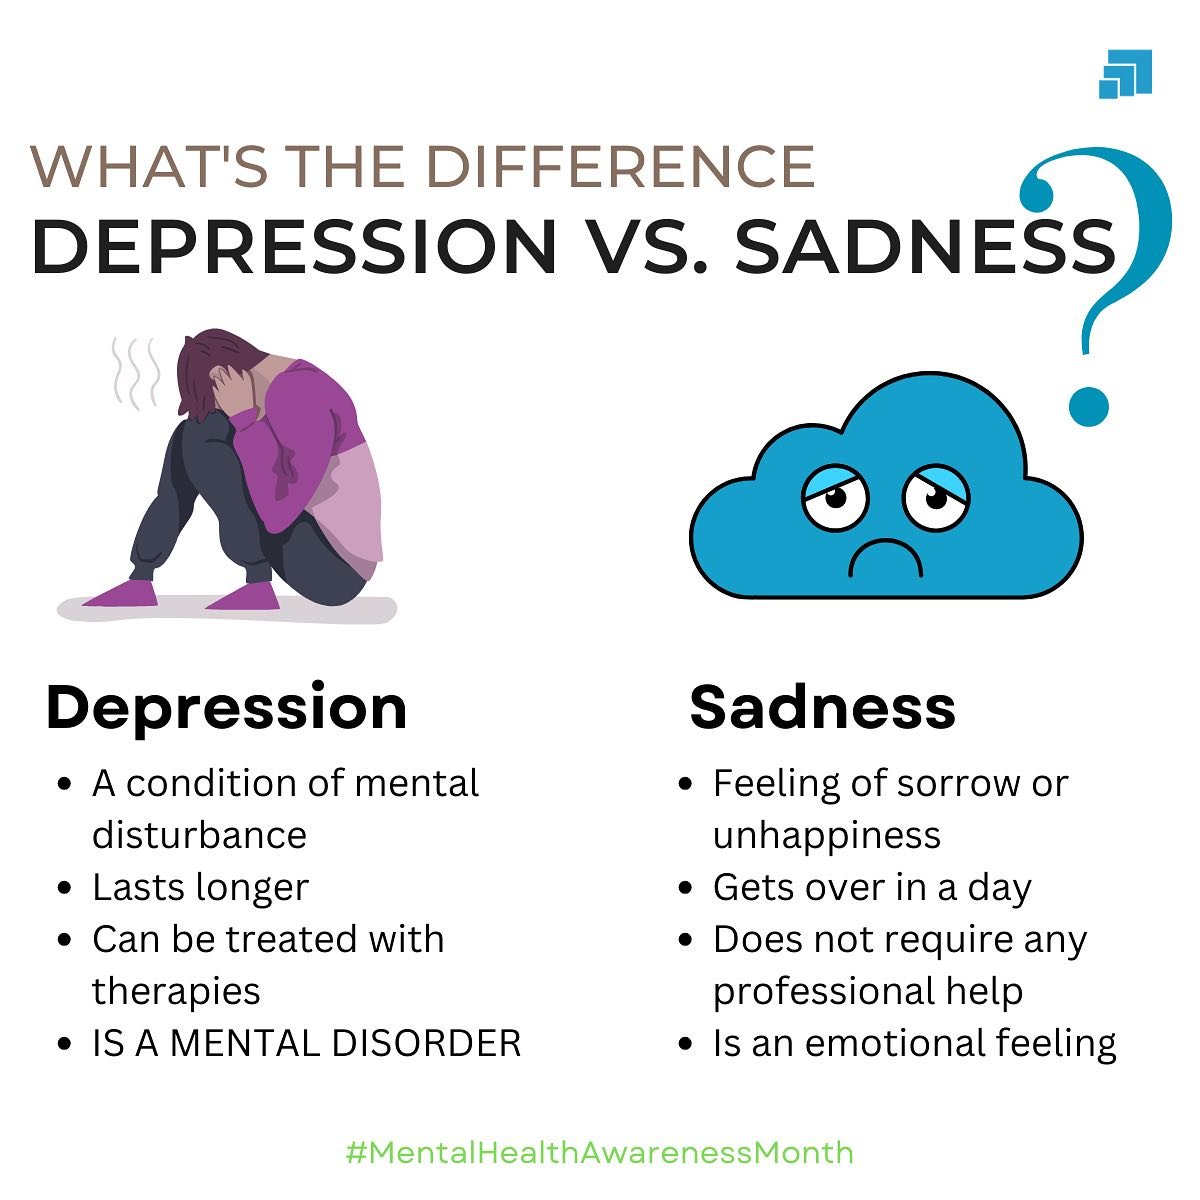 This week we are focusing on depression!

Depression is a mental disorder that can often be confused with emotions of sadness. It is important to be educated on the key differences between the two to know whether or not you should seek professional h